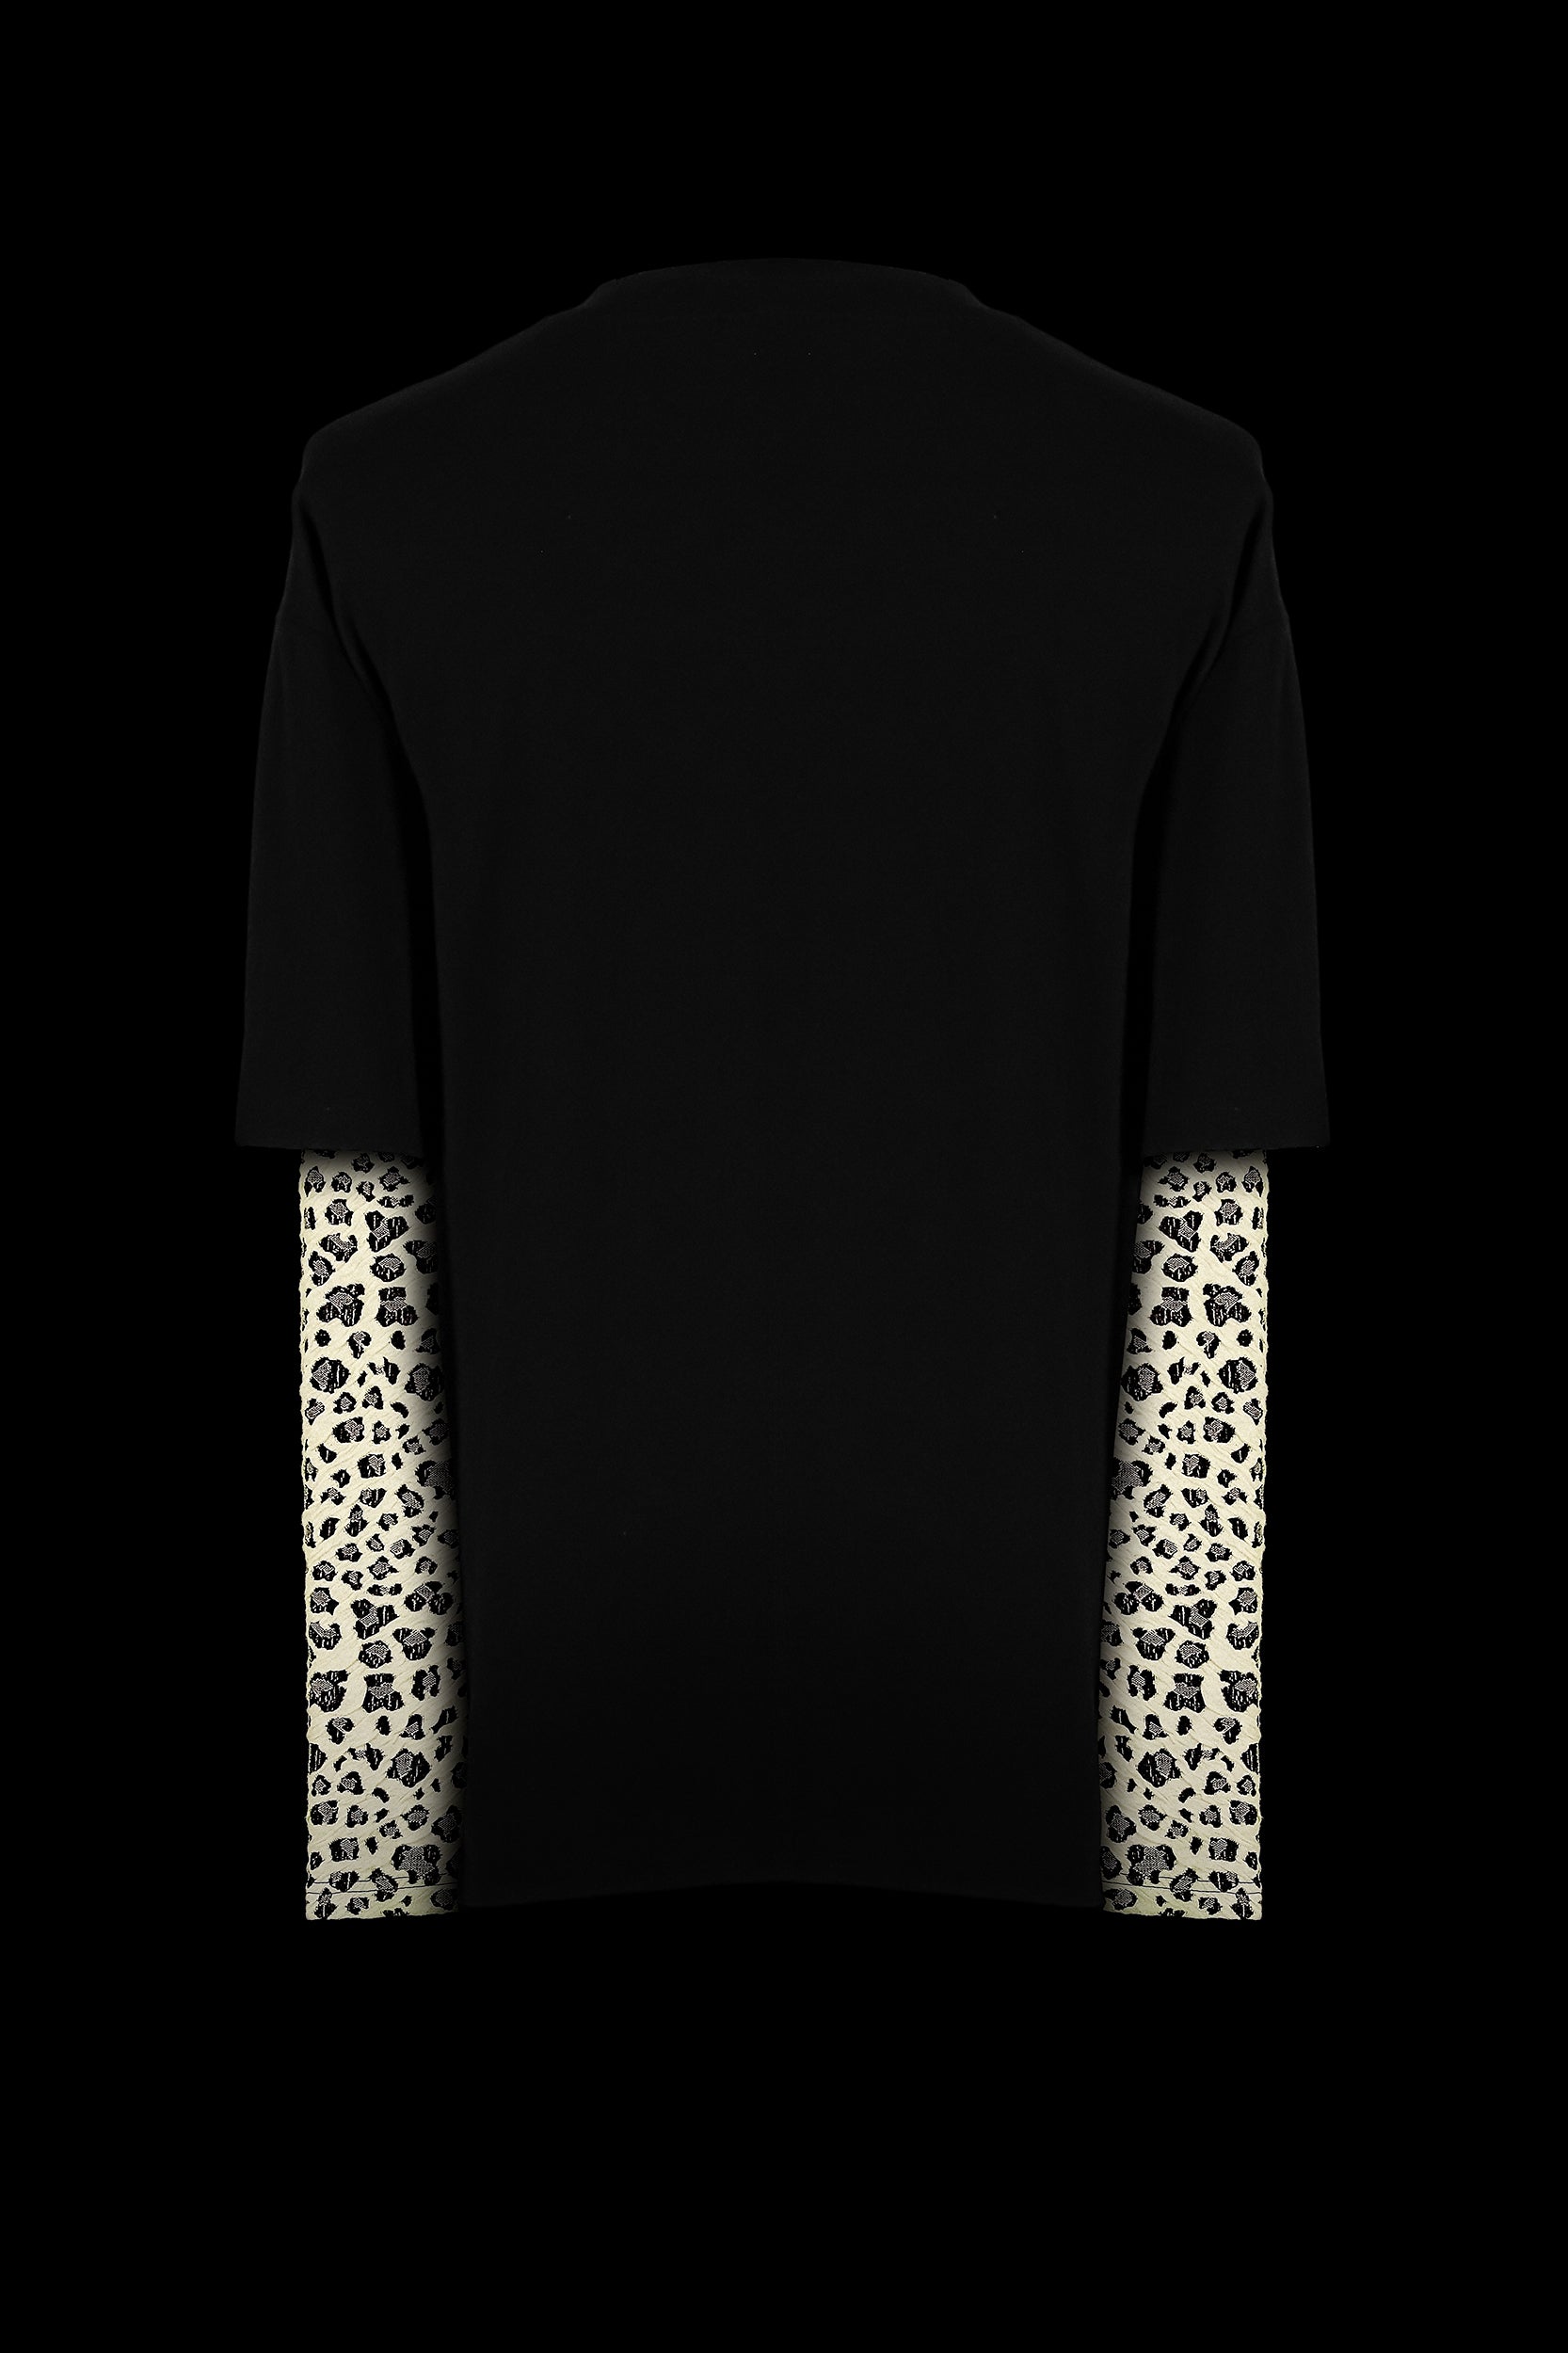 Oversized Layered T-Shirt with Fitted Jacquard Knit Ivory Leopard Long Sleeves